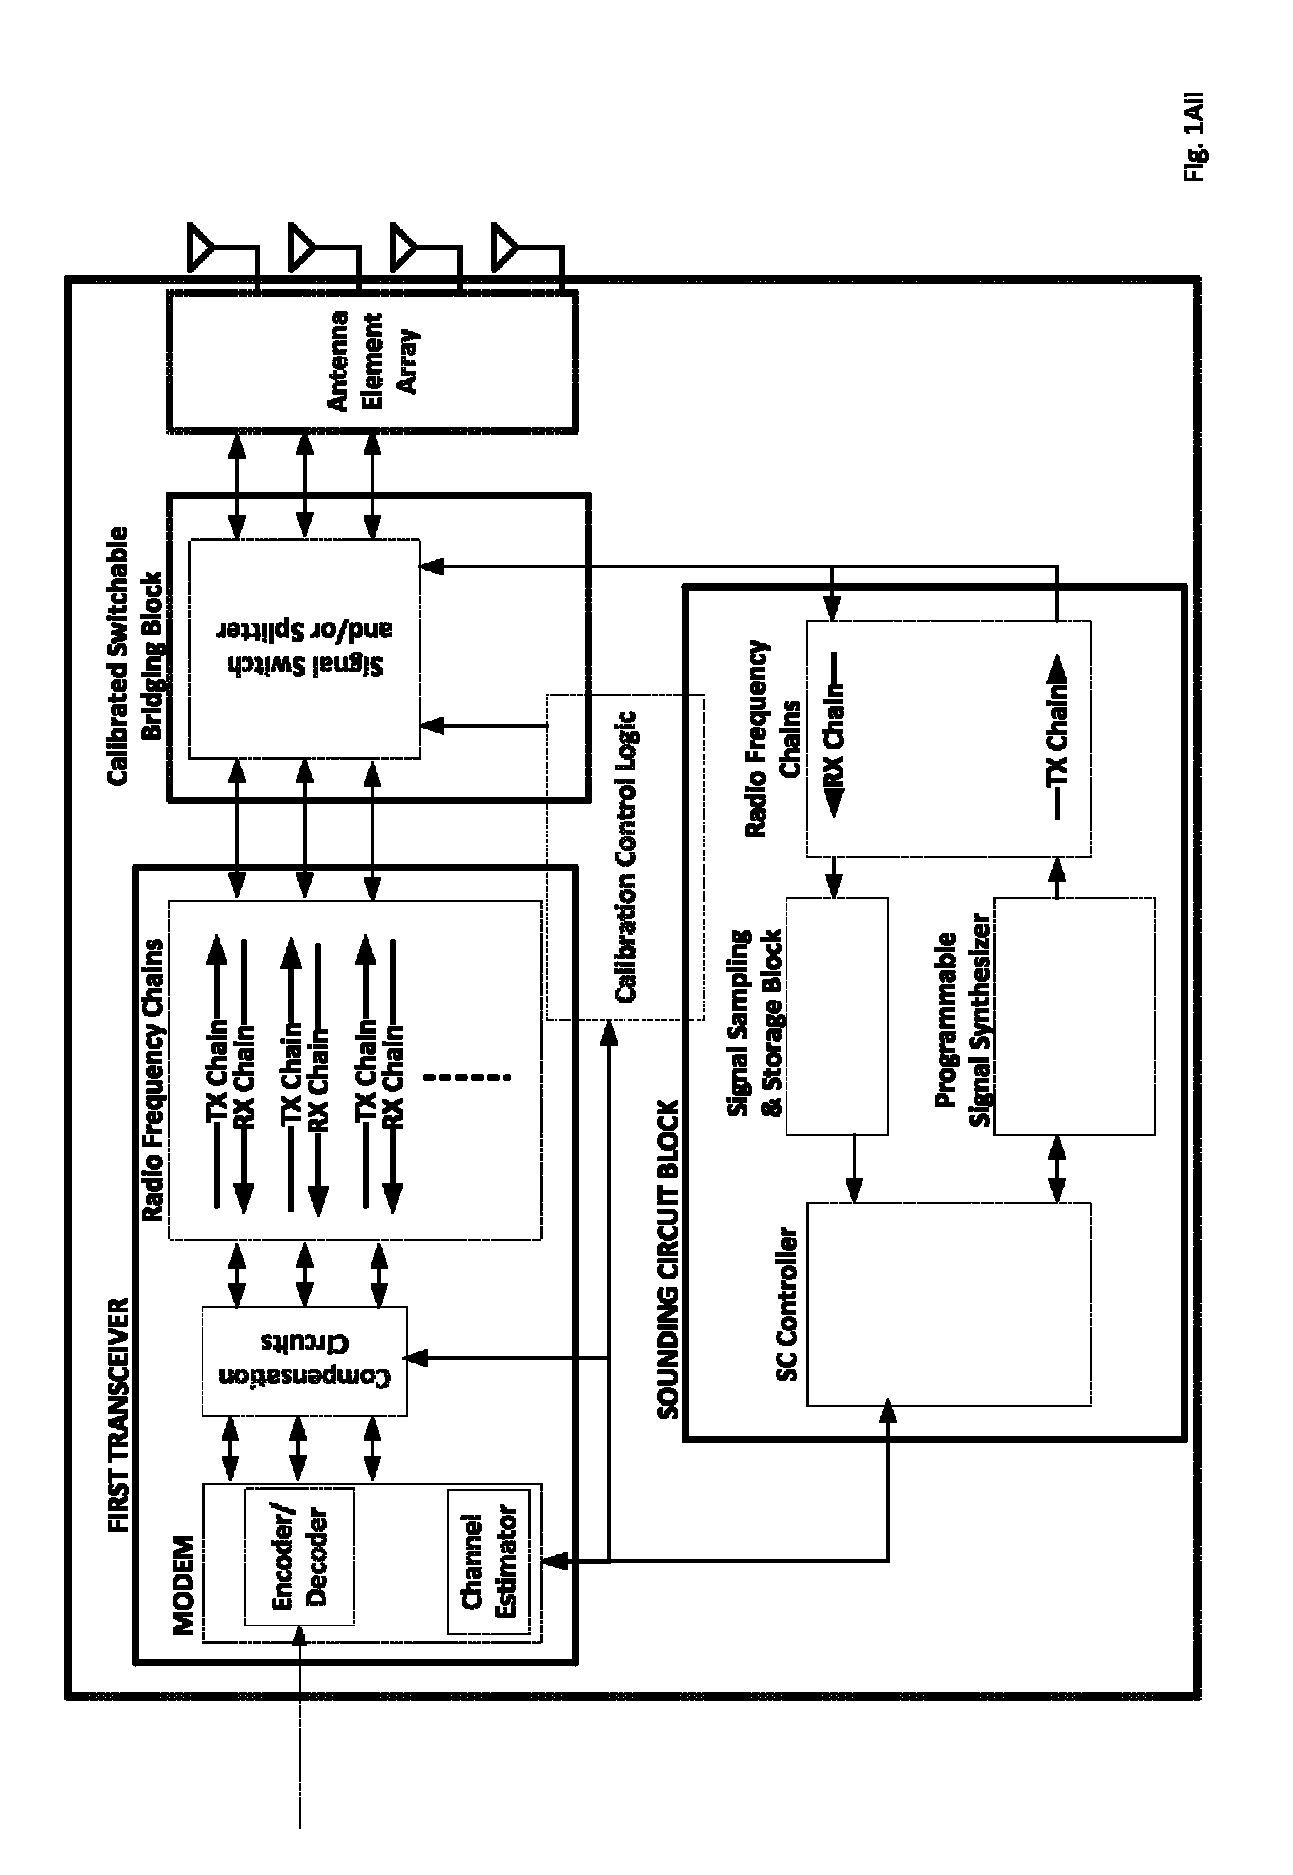 Systems methods circuits and apparatus for calibrating wireless communication systems